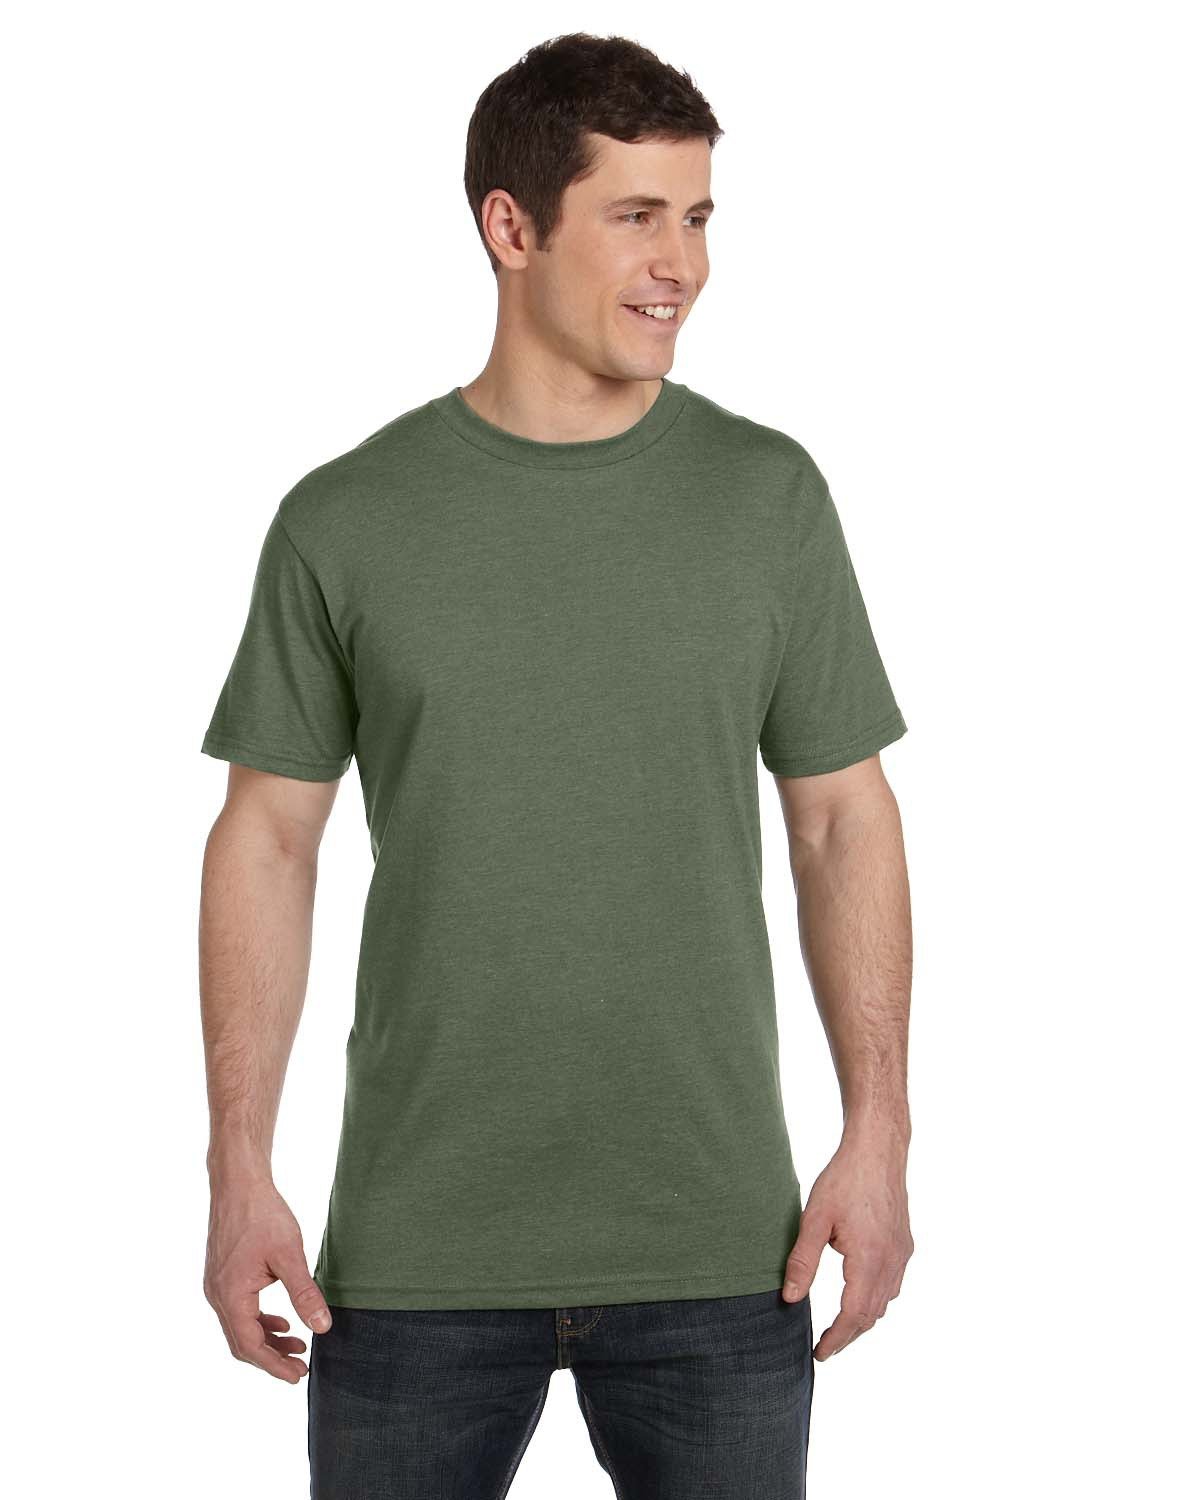 Front view of Unisex Eco Blend T-Shirt